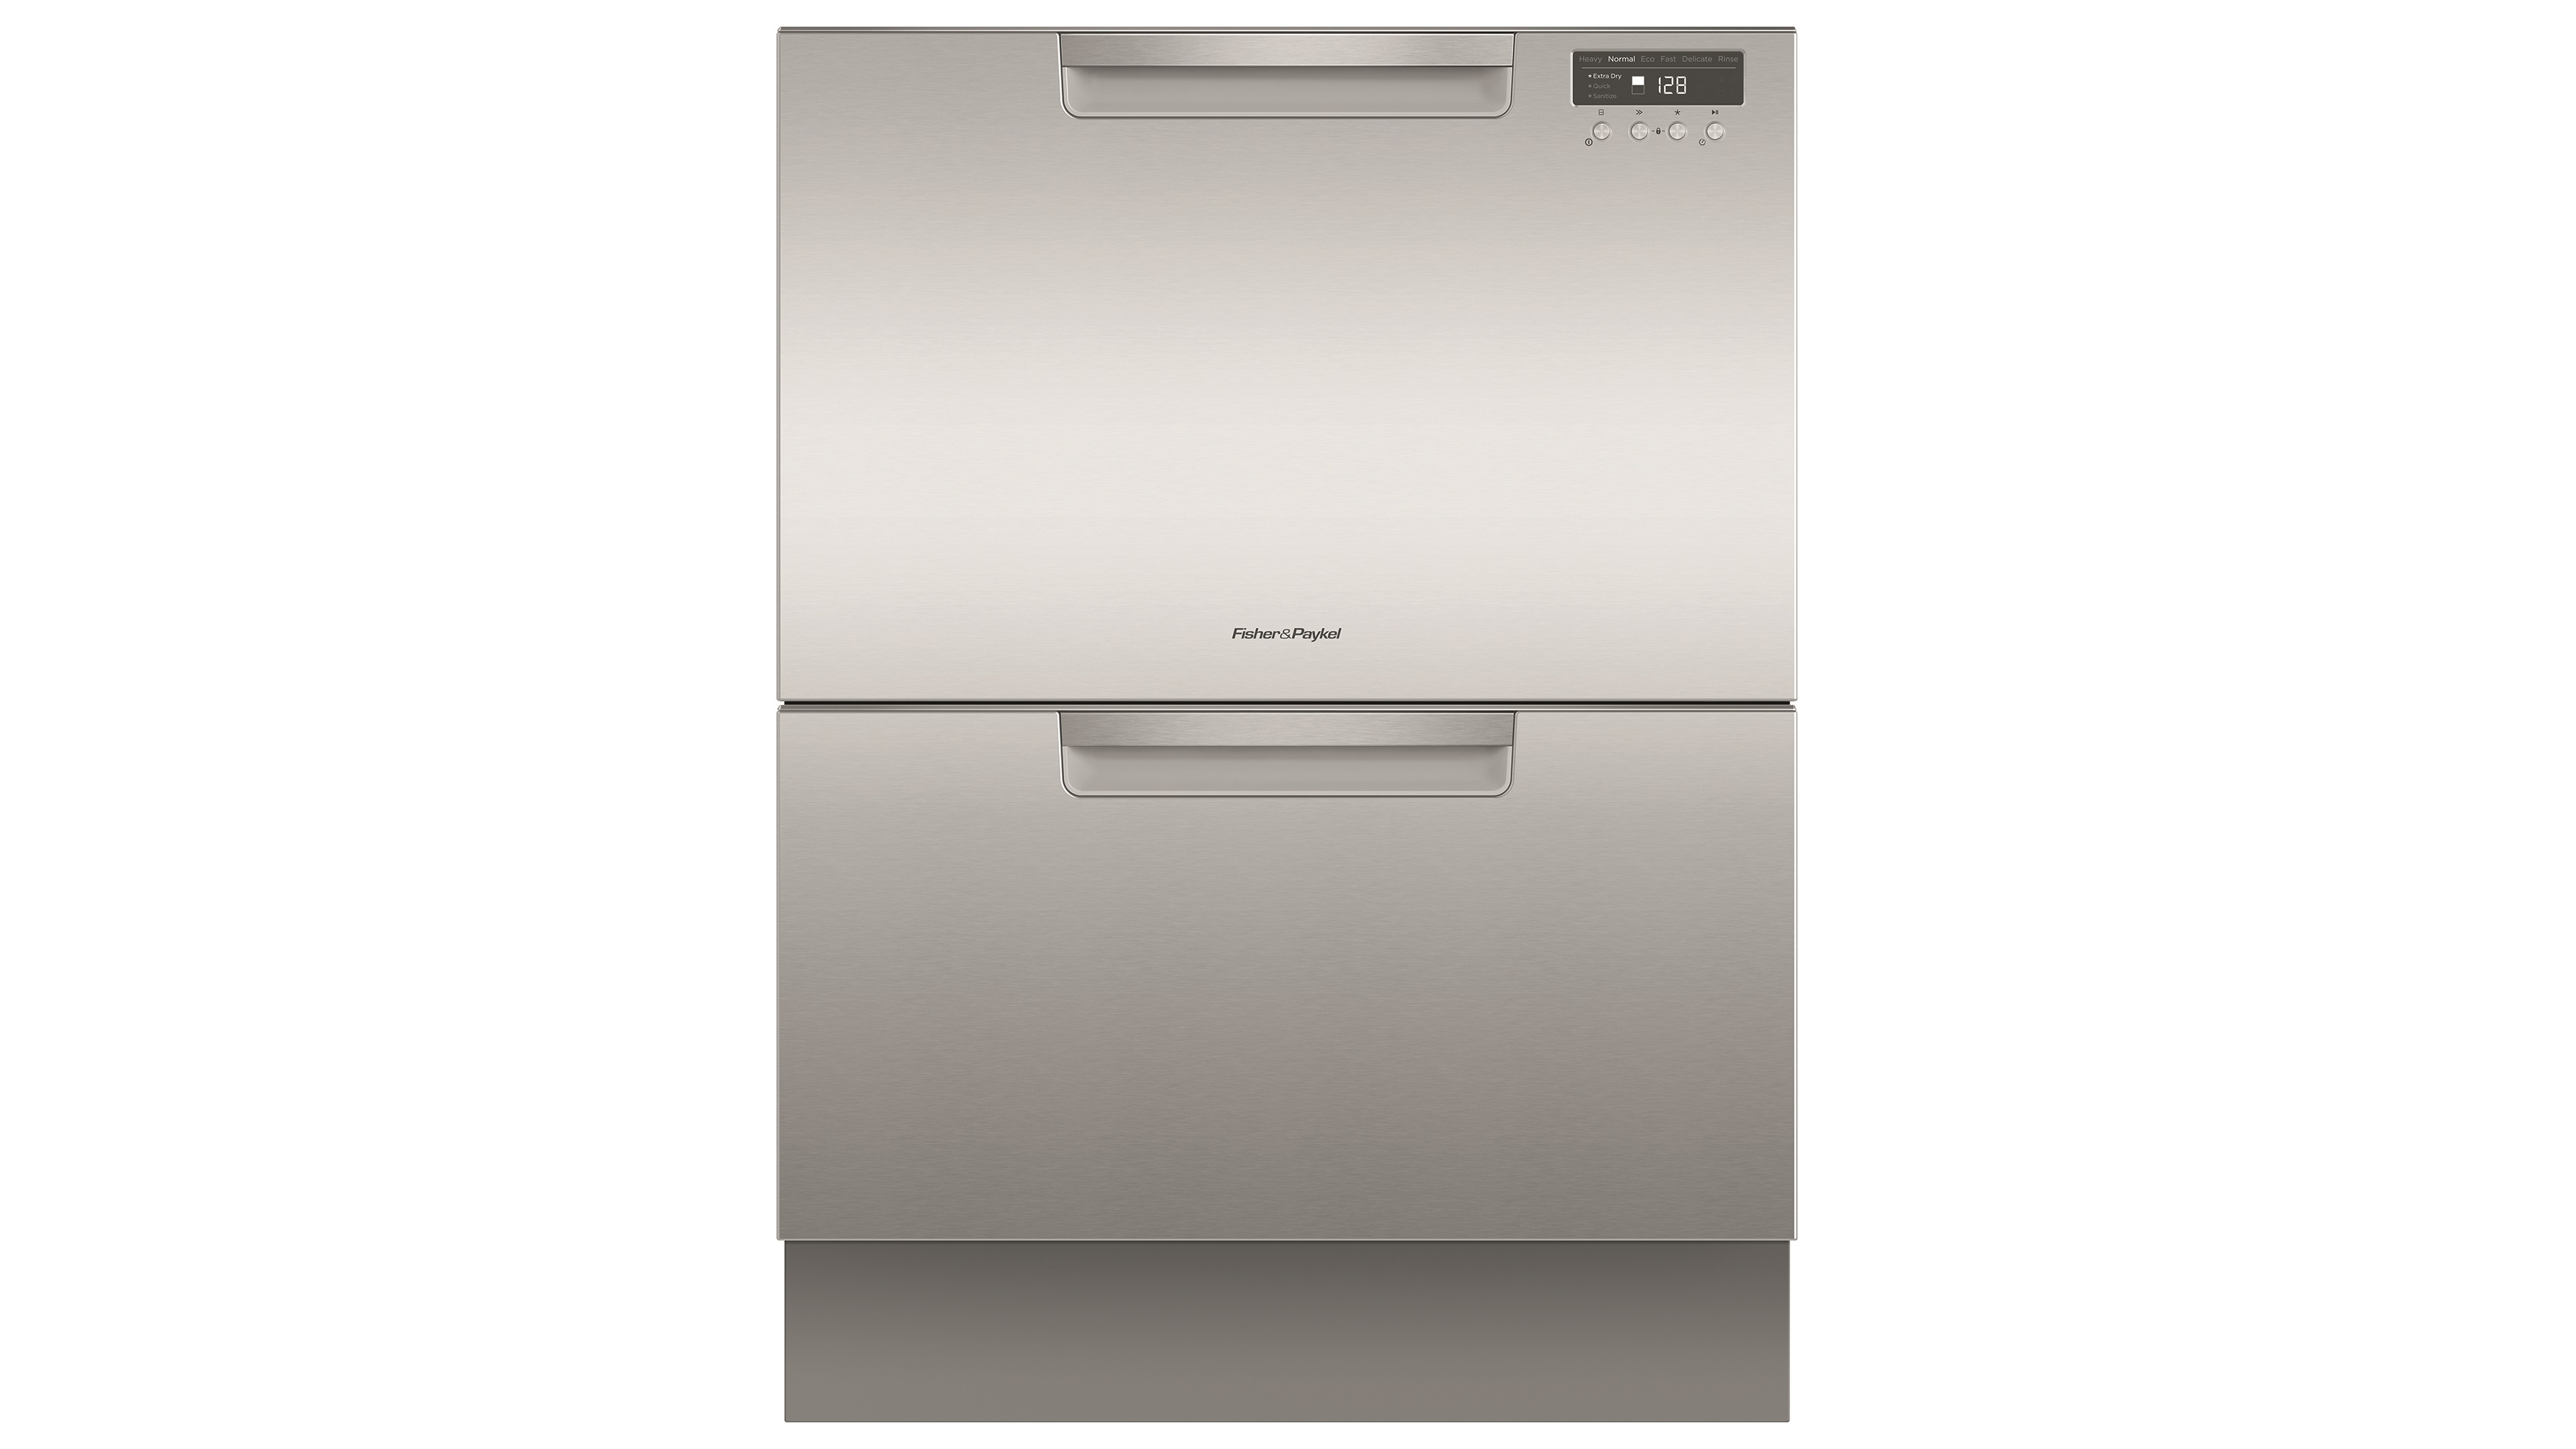 Buy Fisher Paykel Double Dishdrawer Stainless Steel Dishwasher